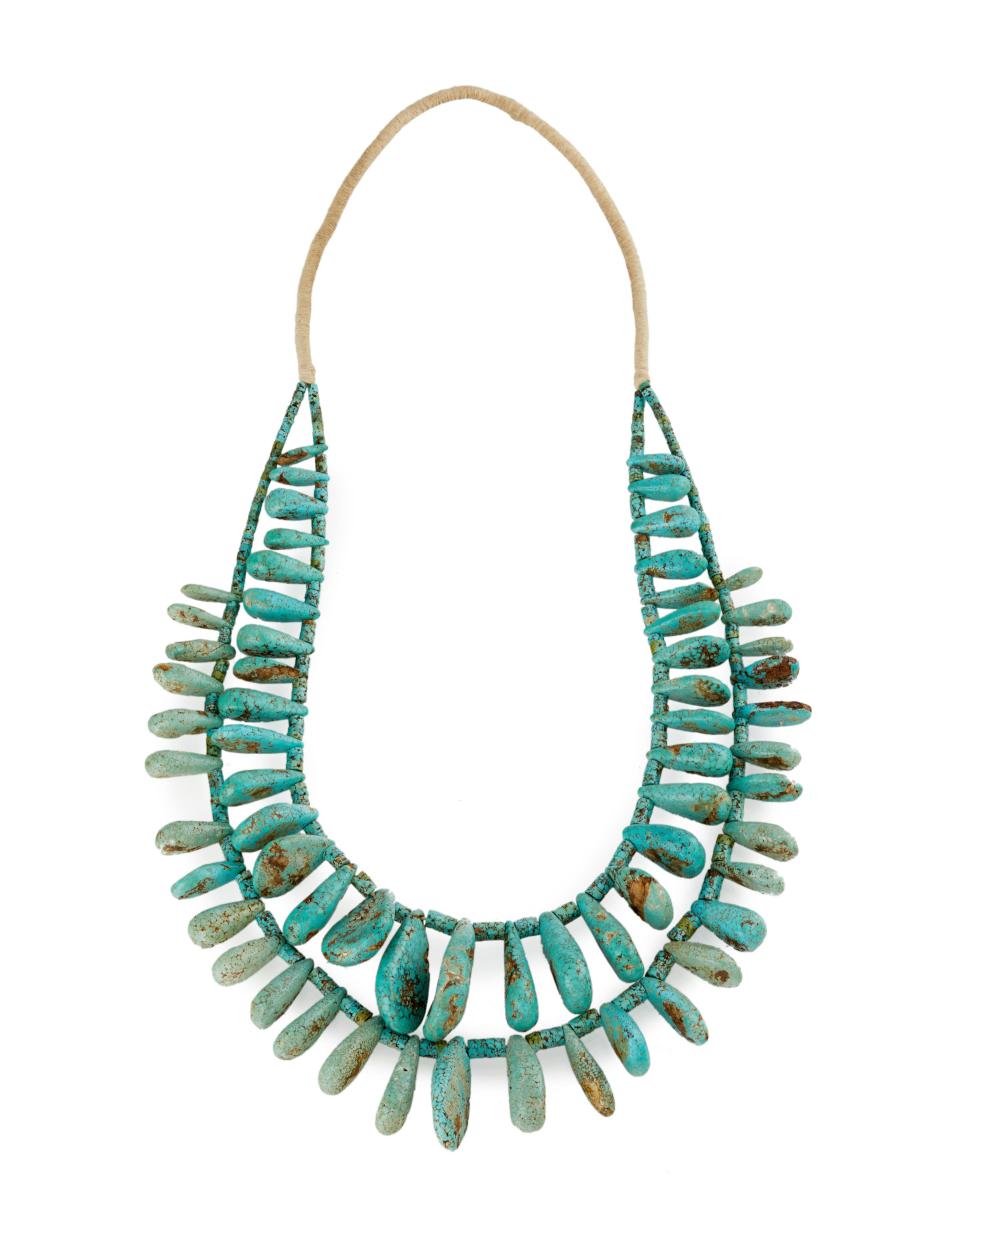 A TURQUOISE NECKLACEA turquoise